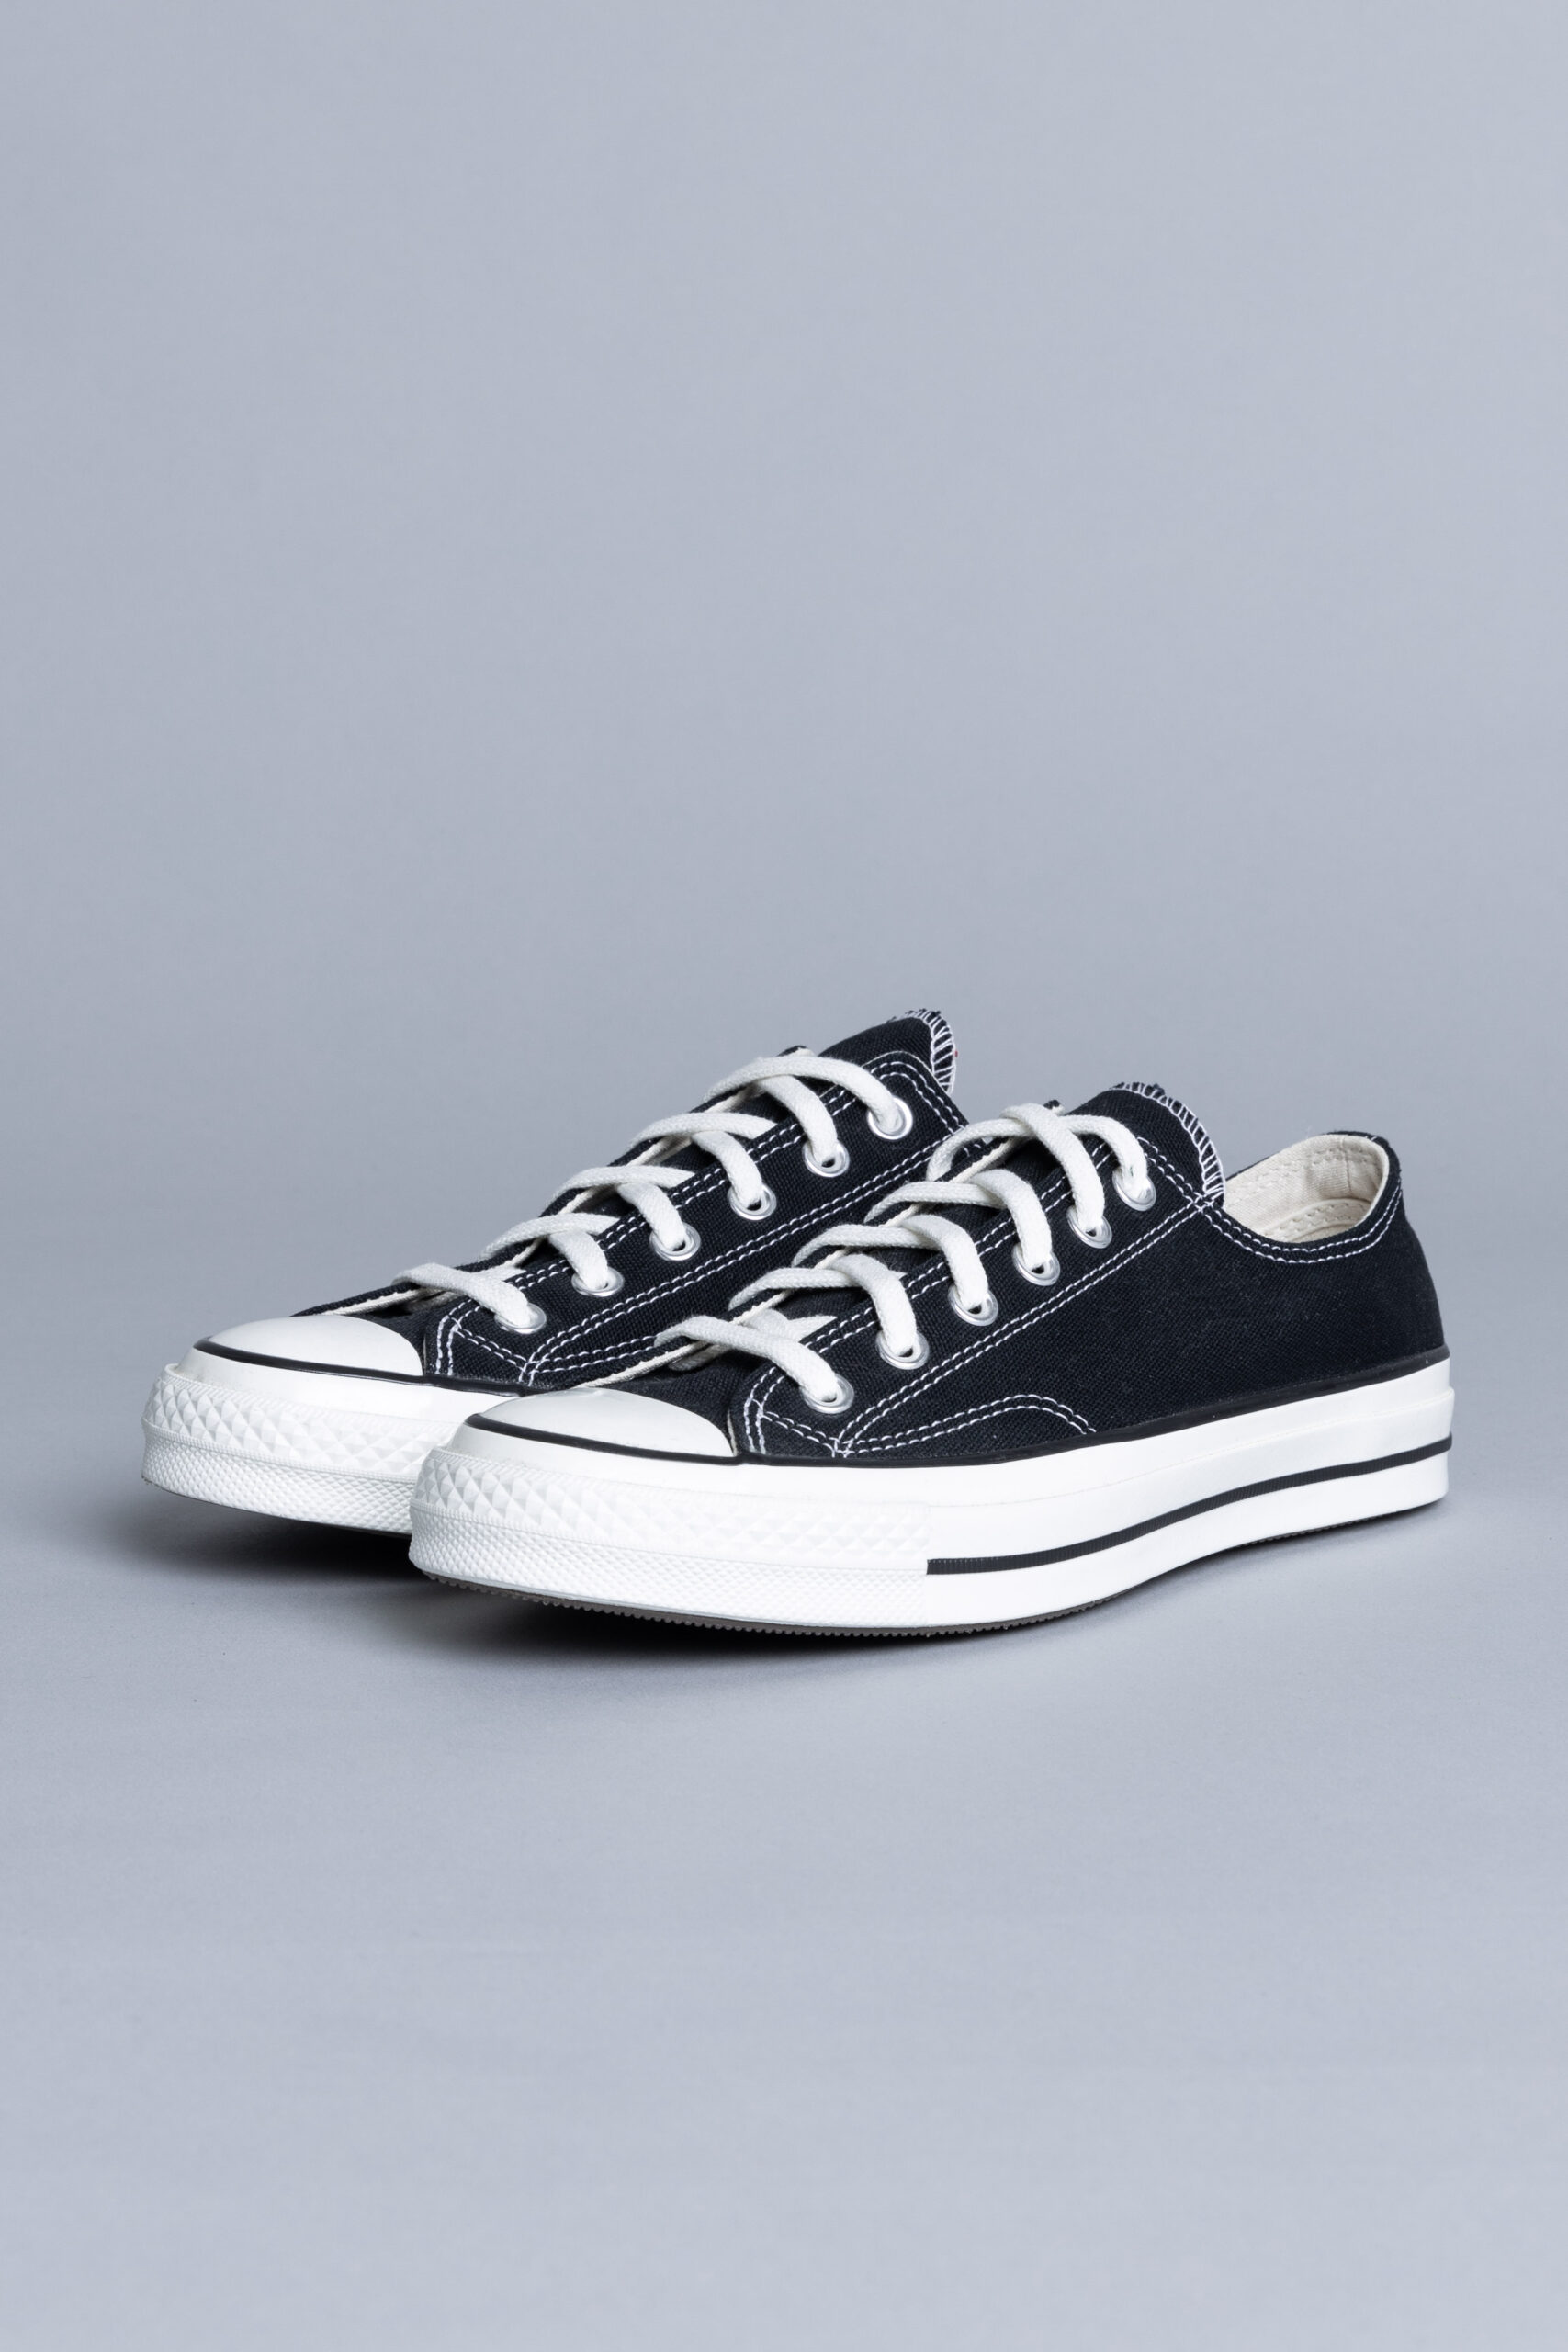 converse 1970's chuck taylor low ox 